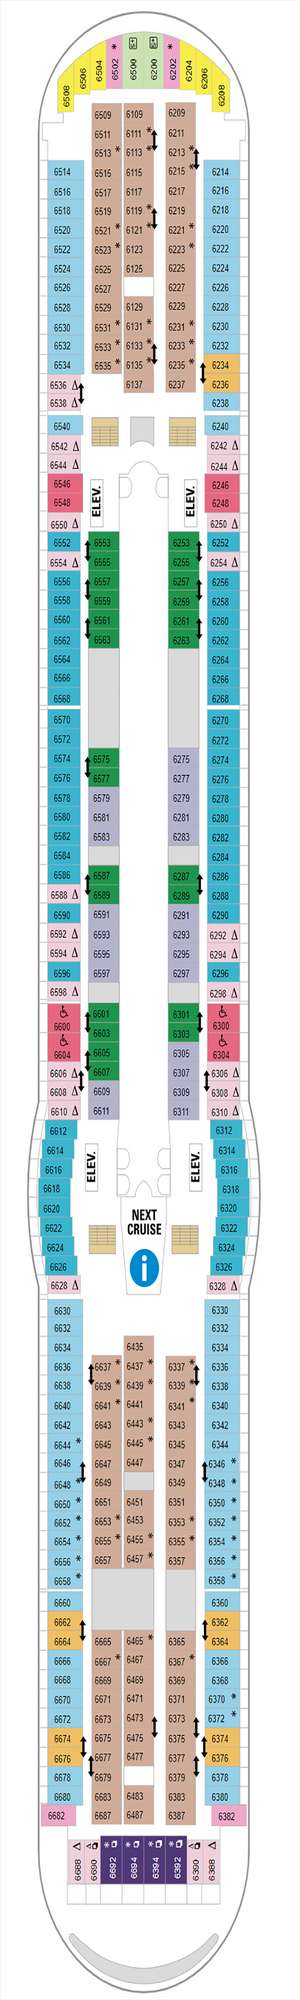 Deck plan for Voyager of the Seas